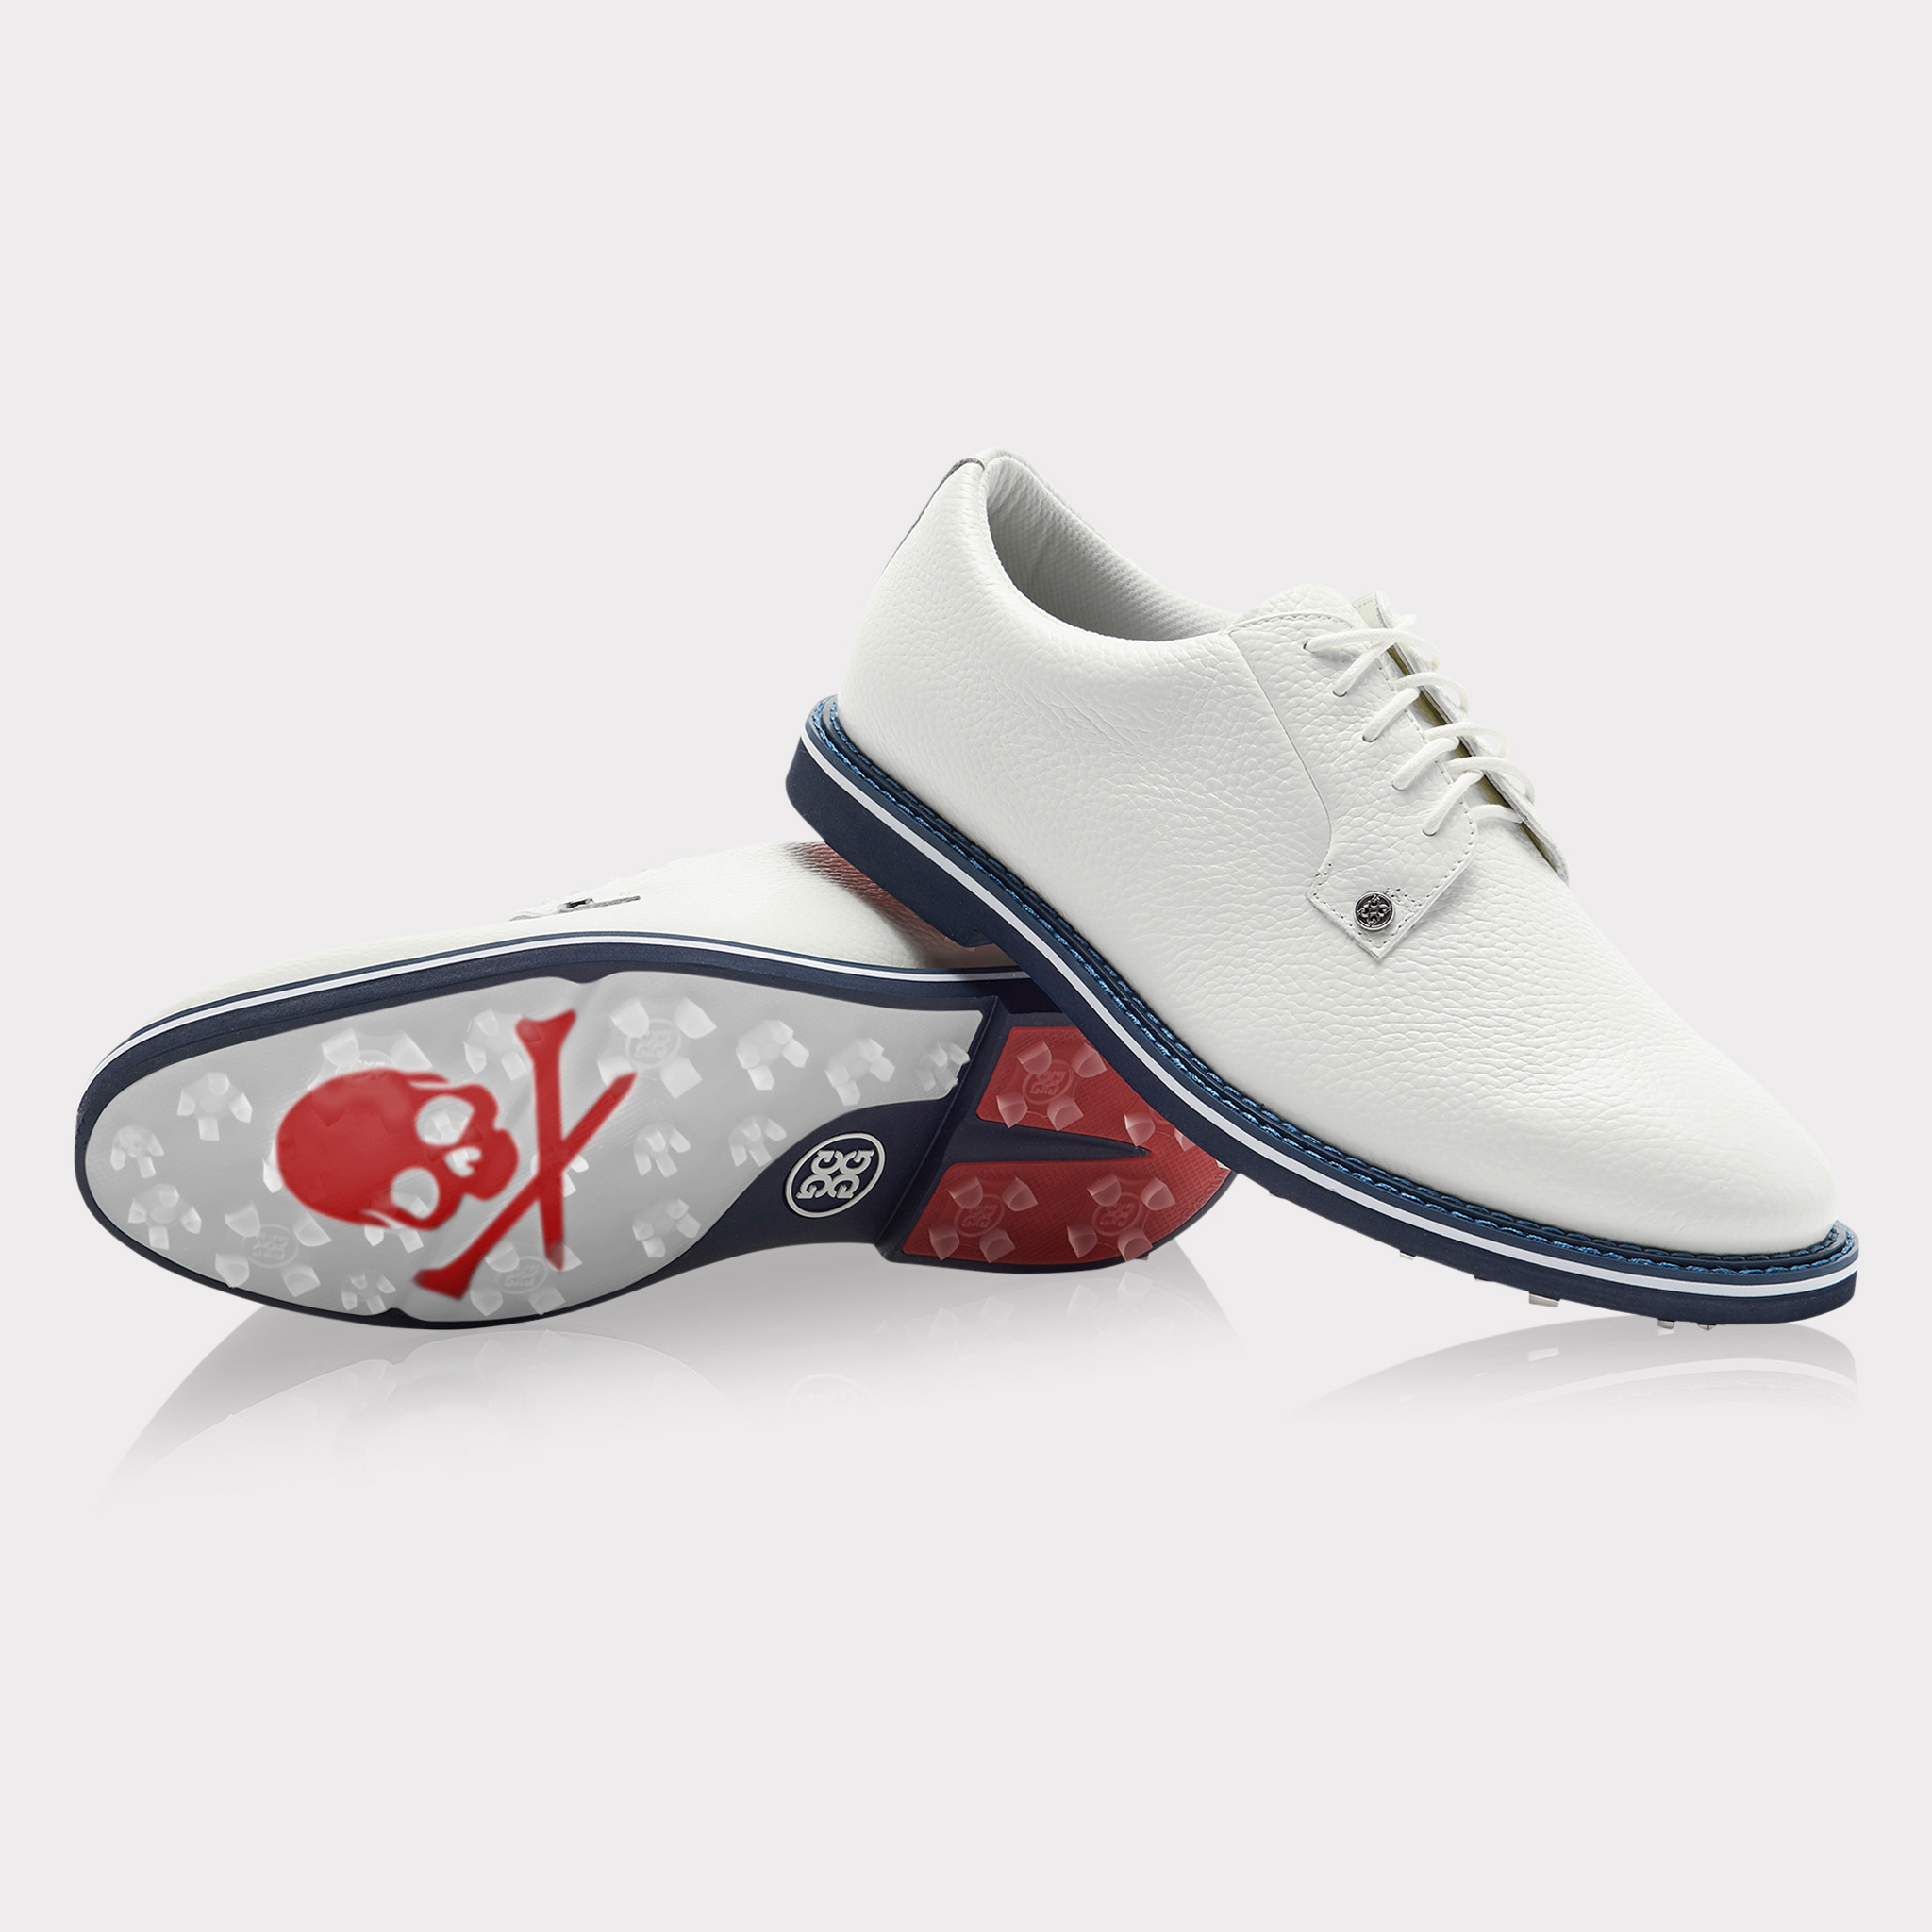 Gfore golf shoes  